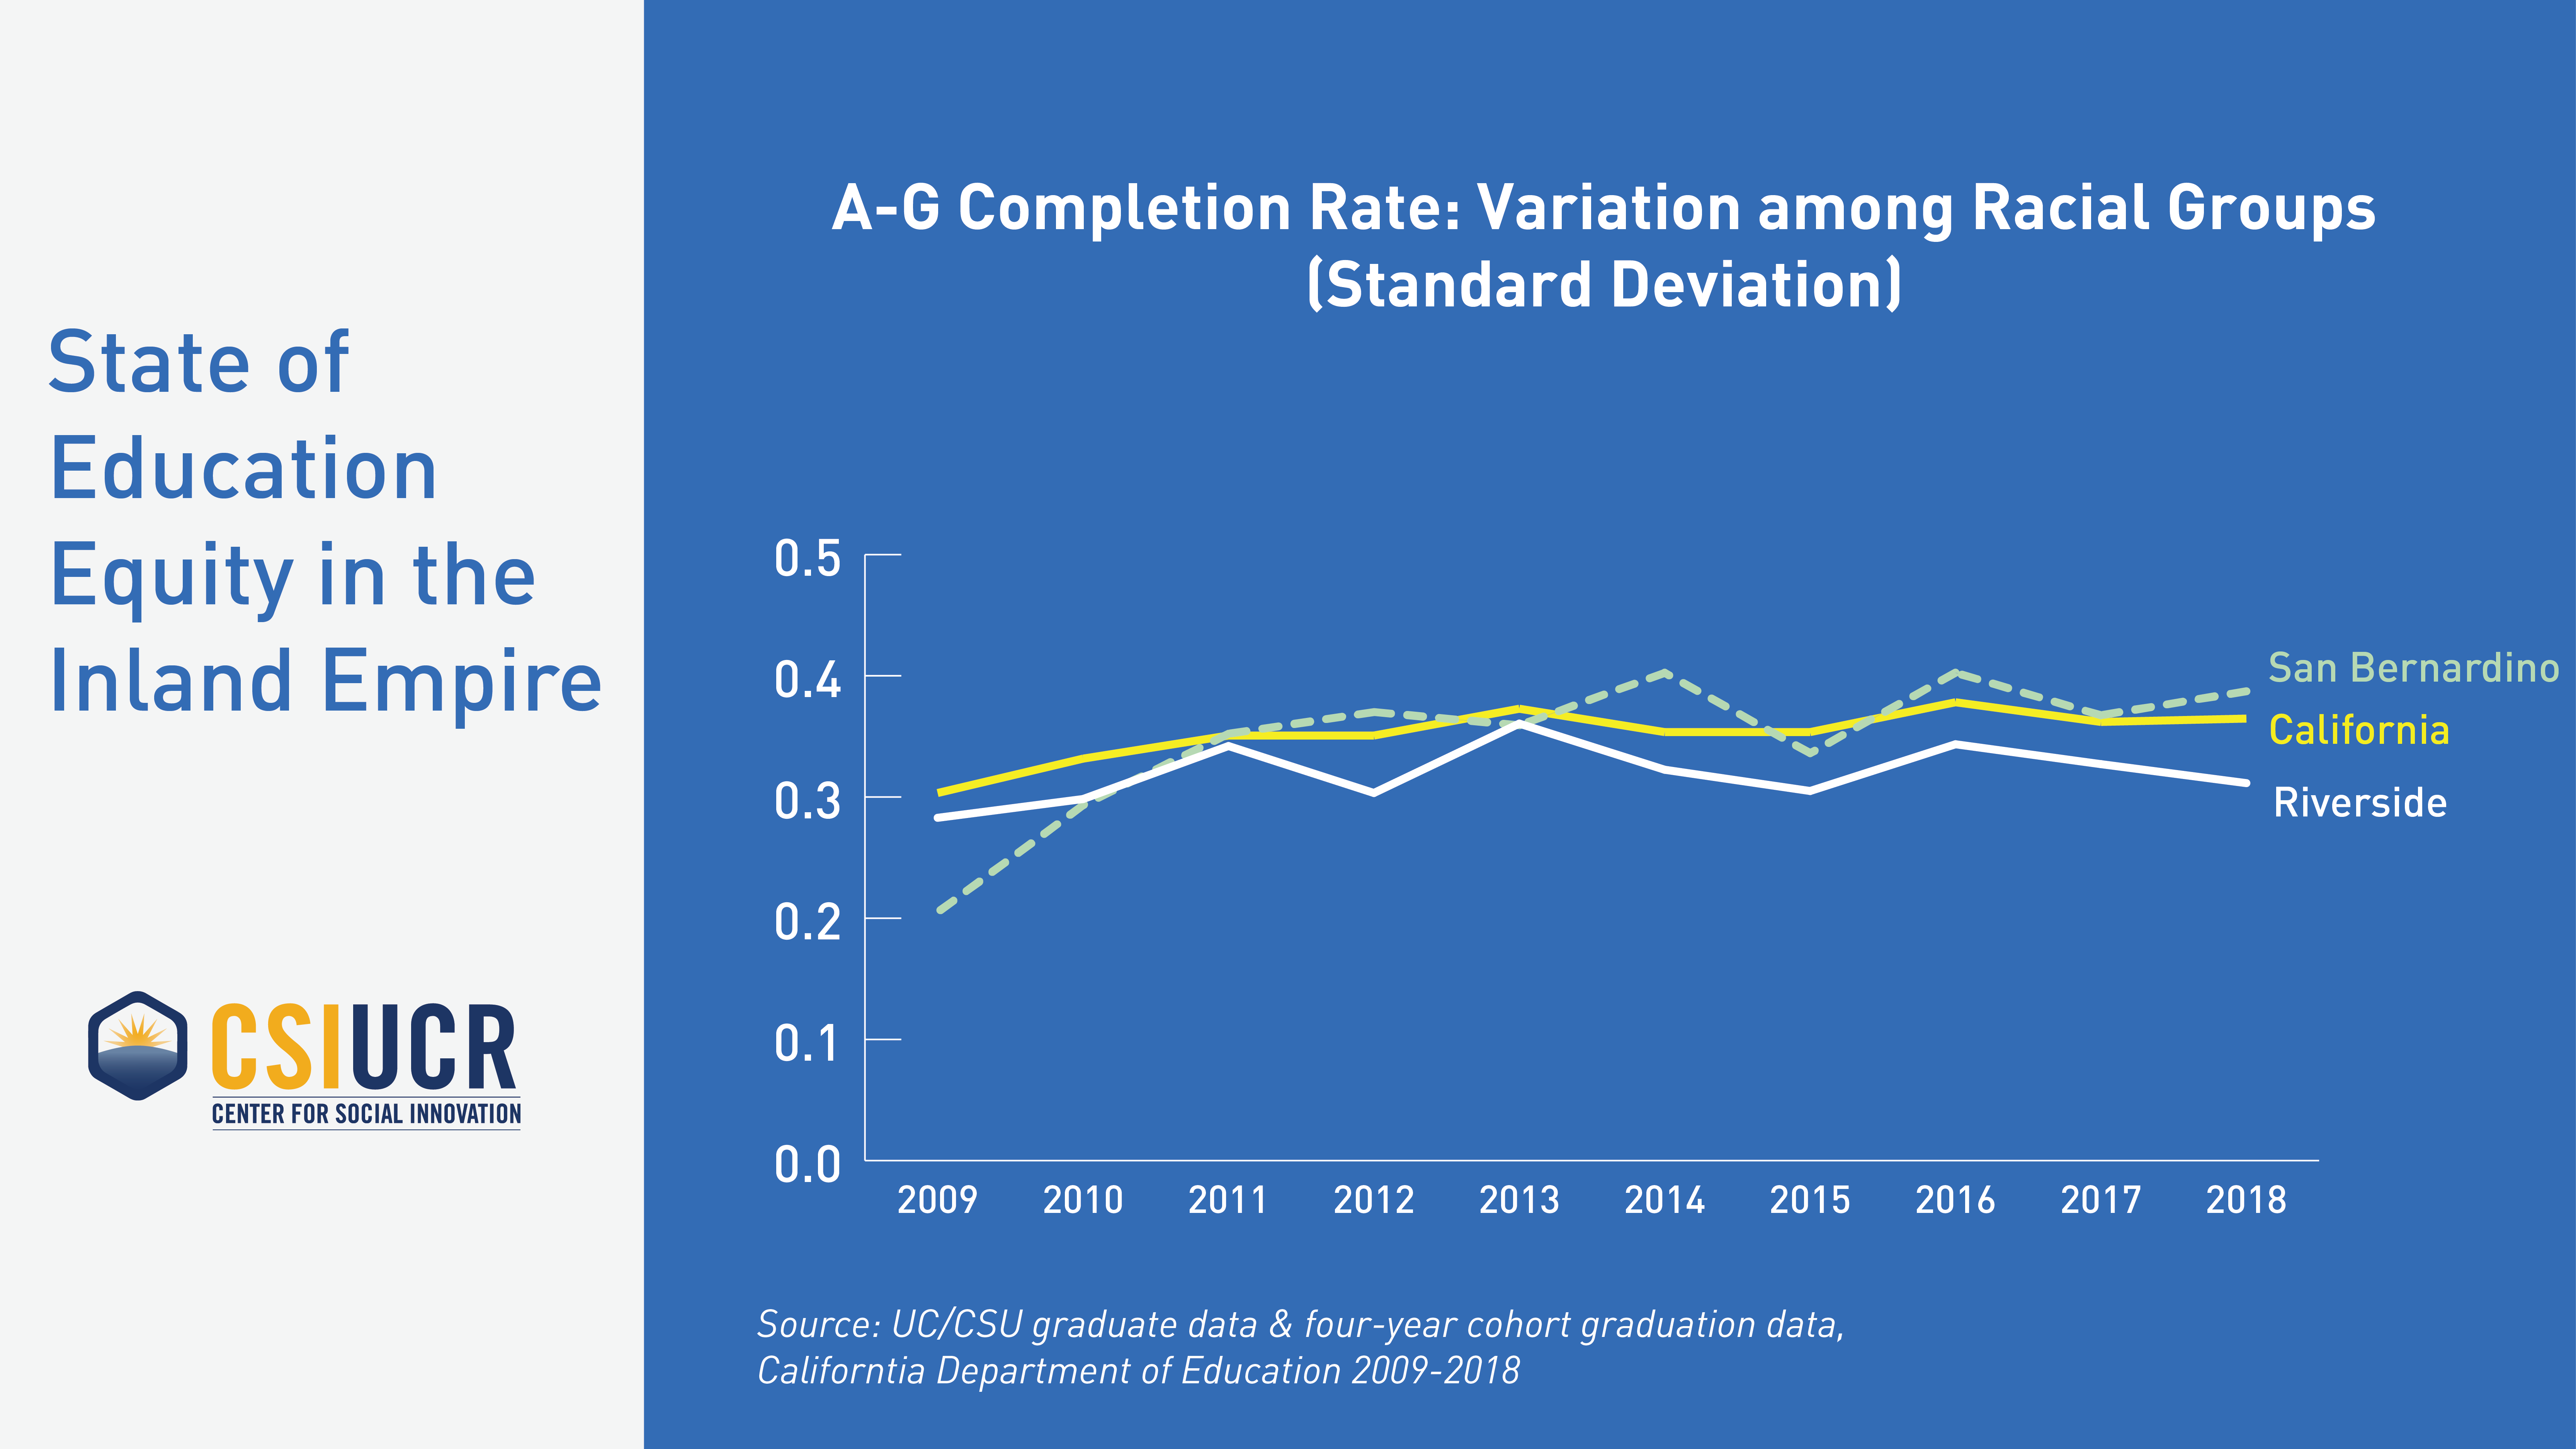 A-G Completion Rate: Variation among Racial Groups